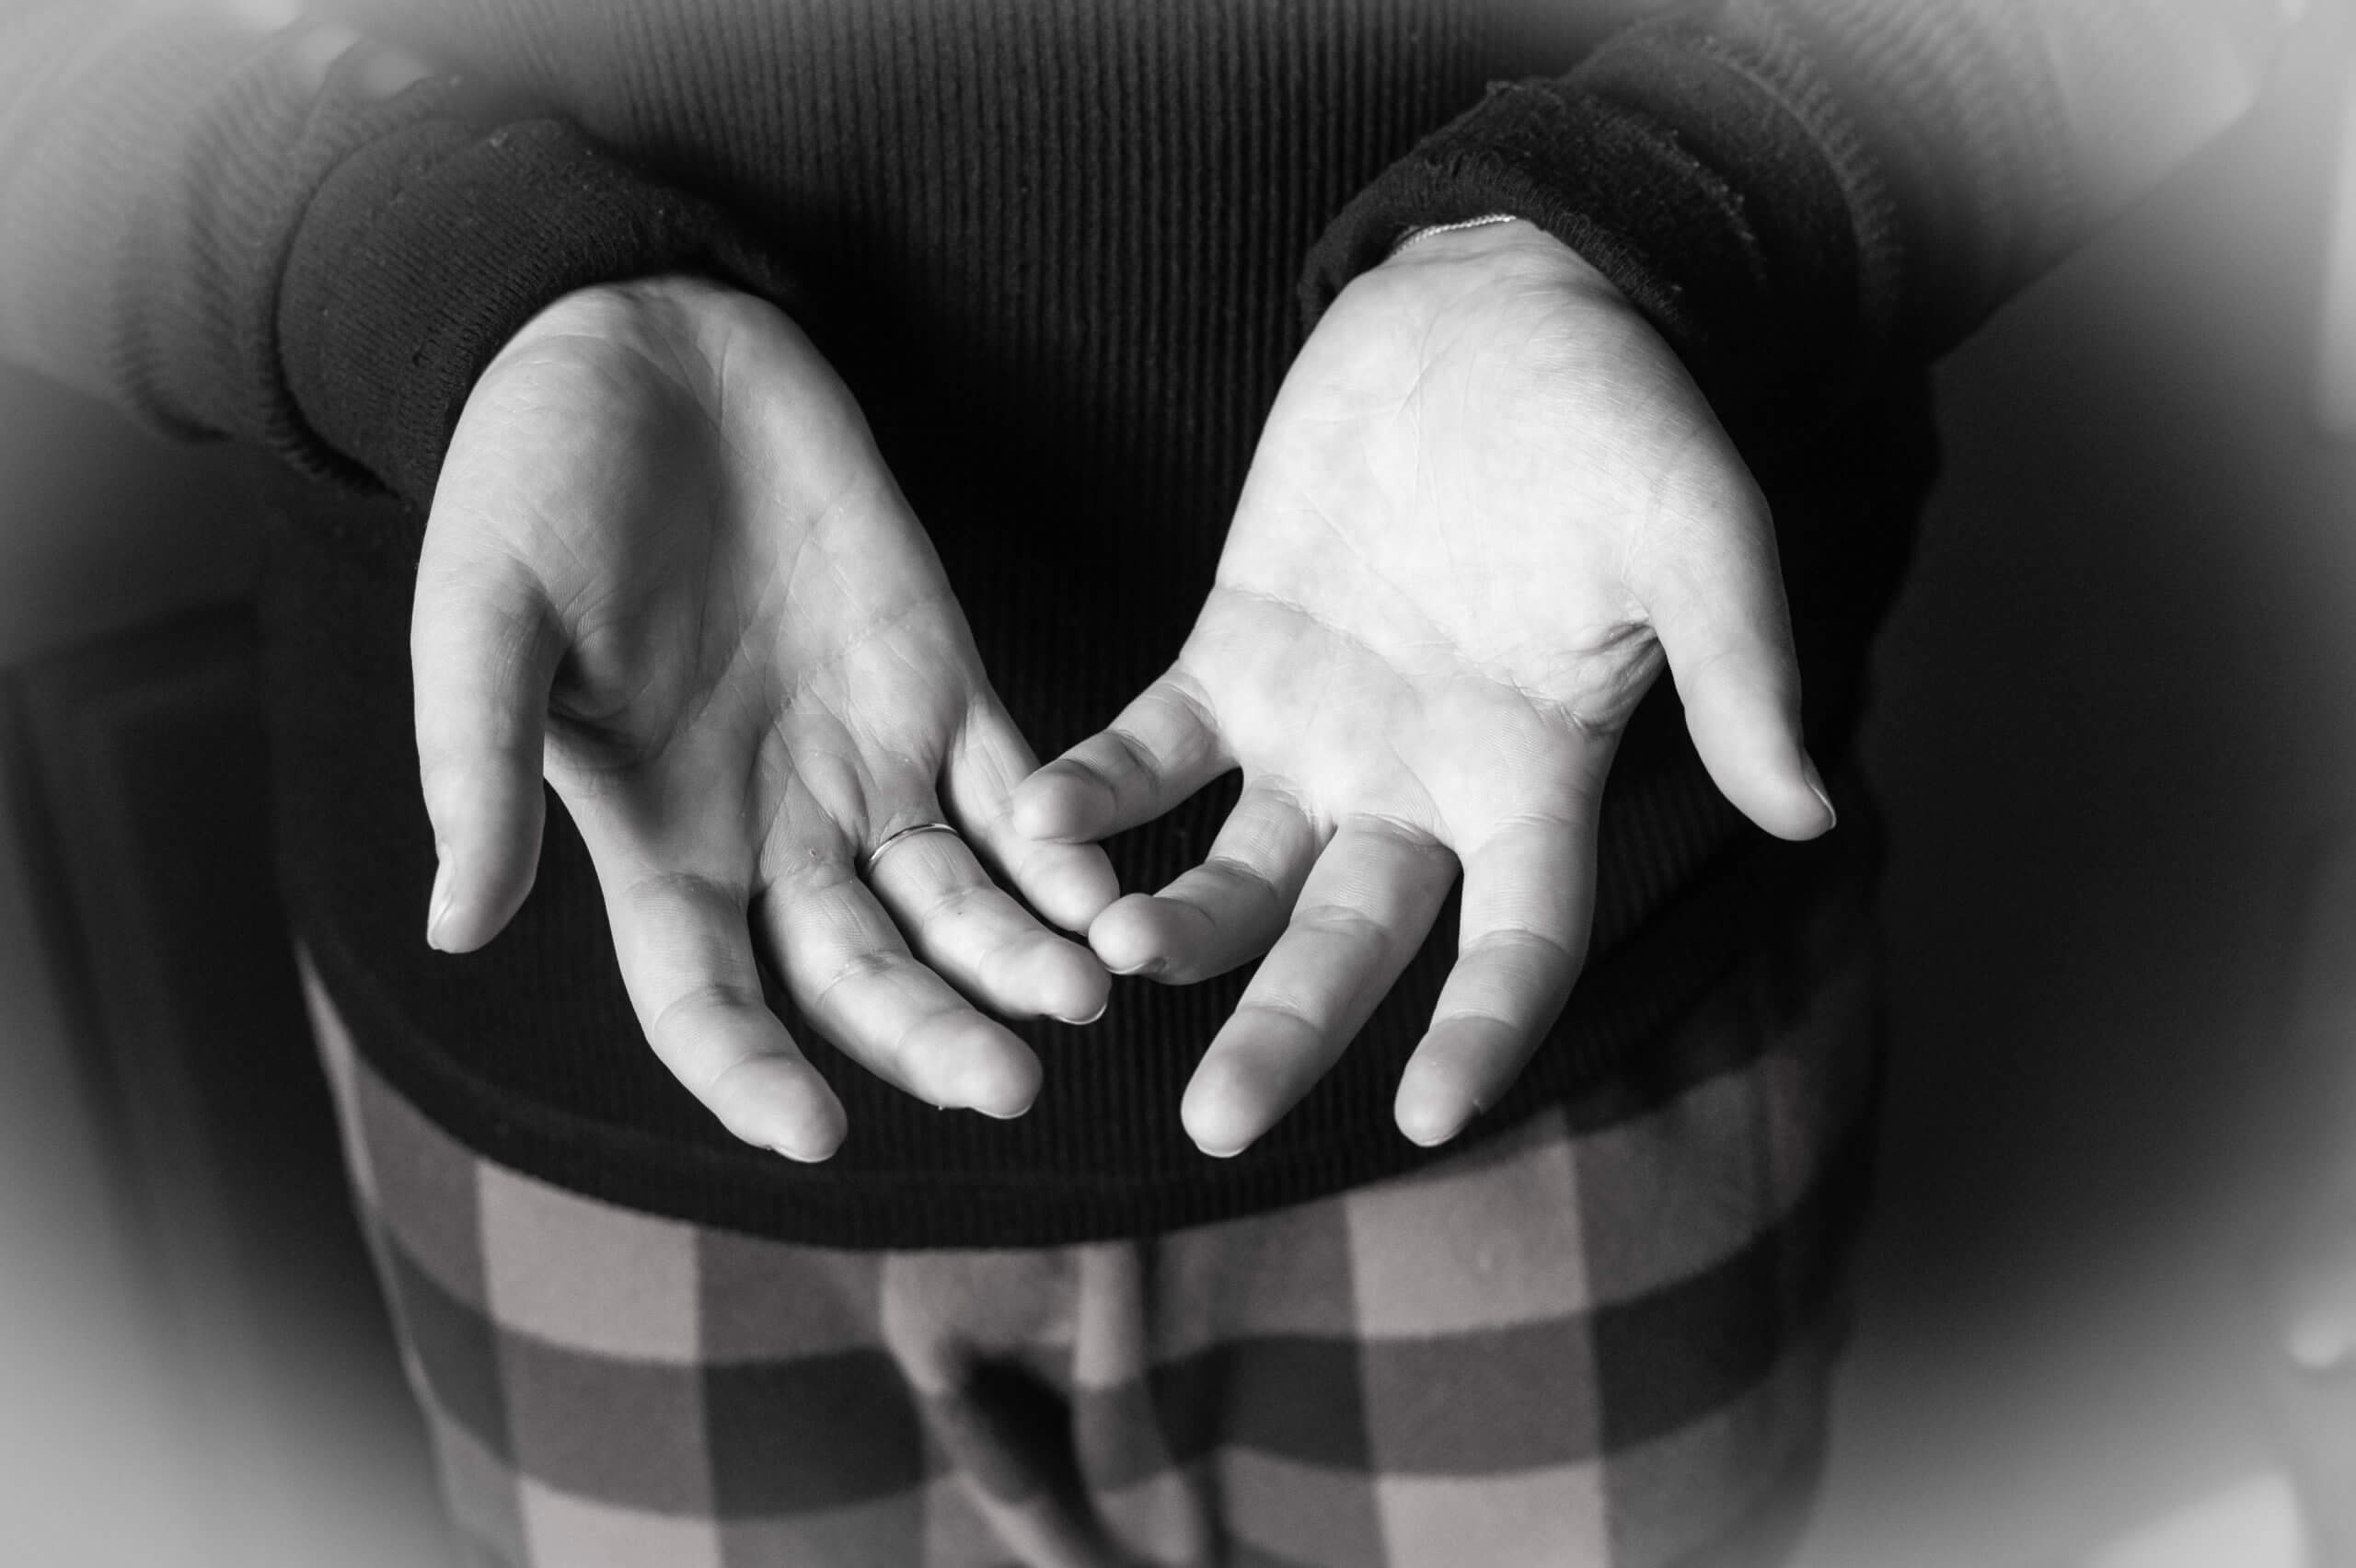 Black and white image of a close-up on hands facing palms up.